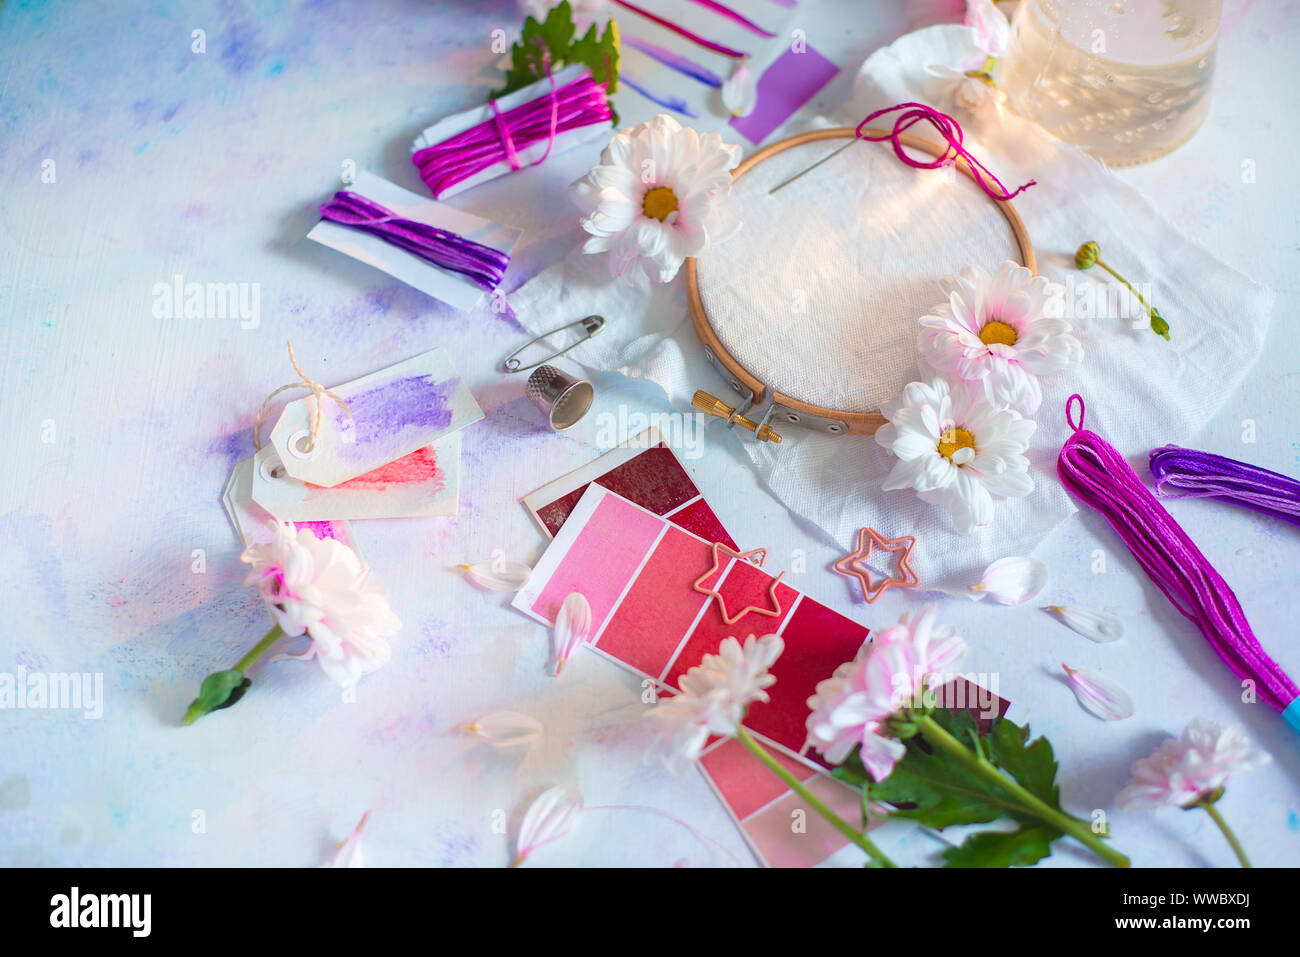 Embroidery frame header with flowers. Pink, white and purple pastel tones, copy space Stock Photo